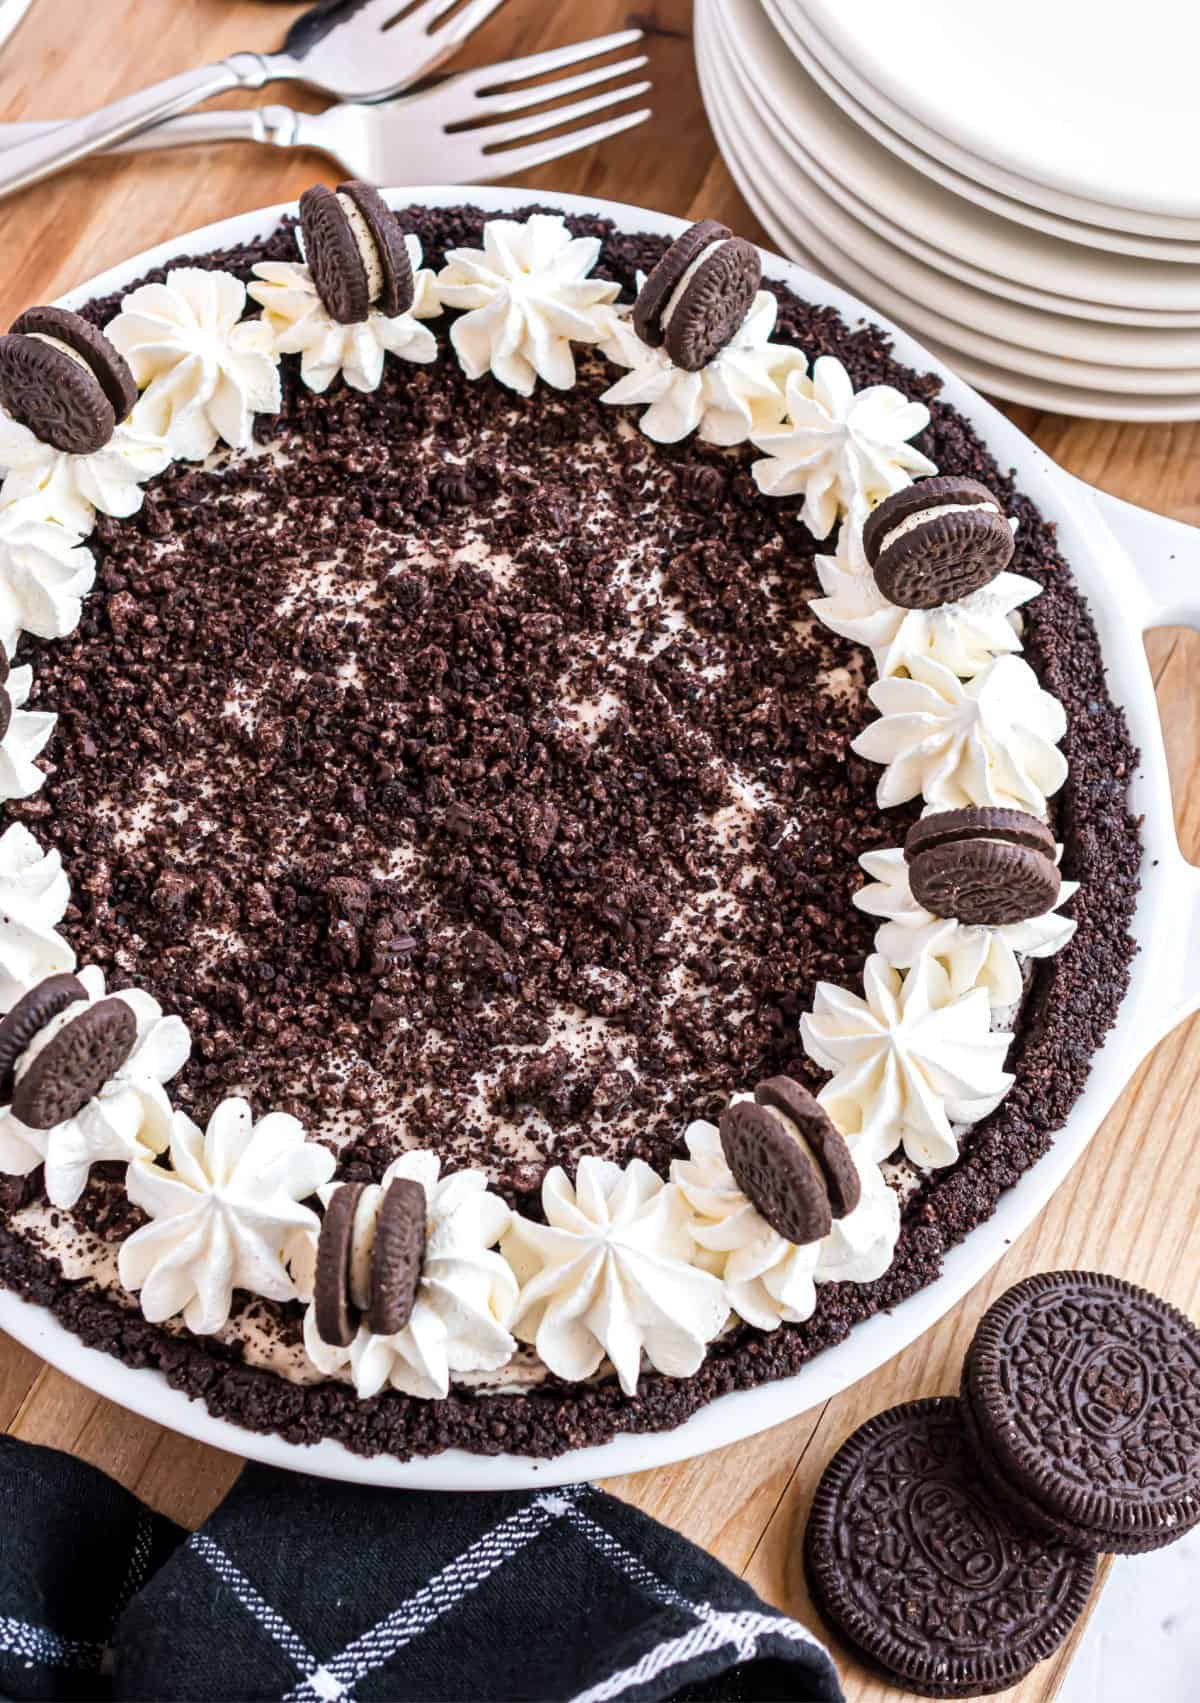 Oreo cheesecake garnished with whipped cream and crushed oreo cookies.